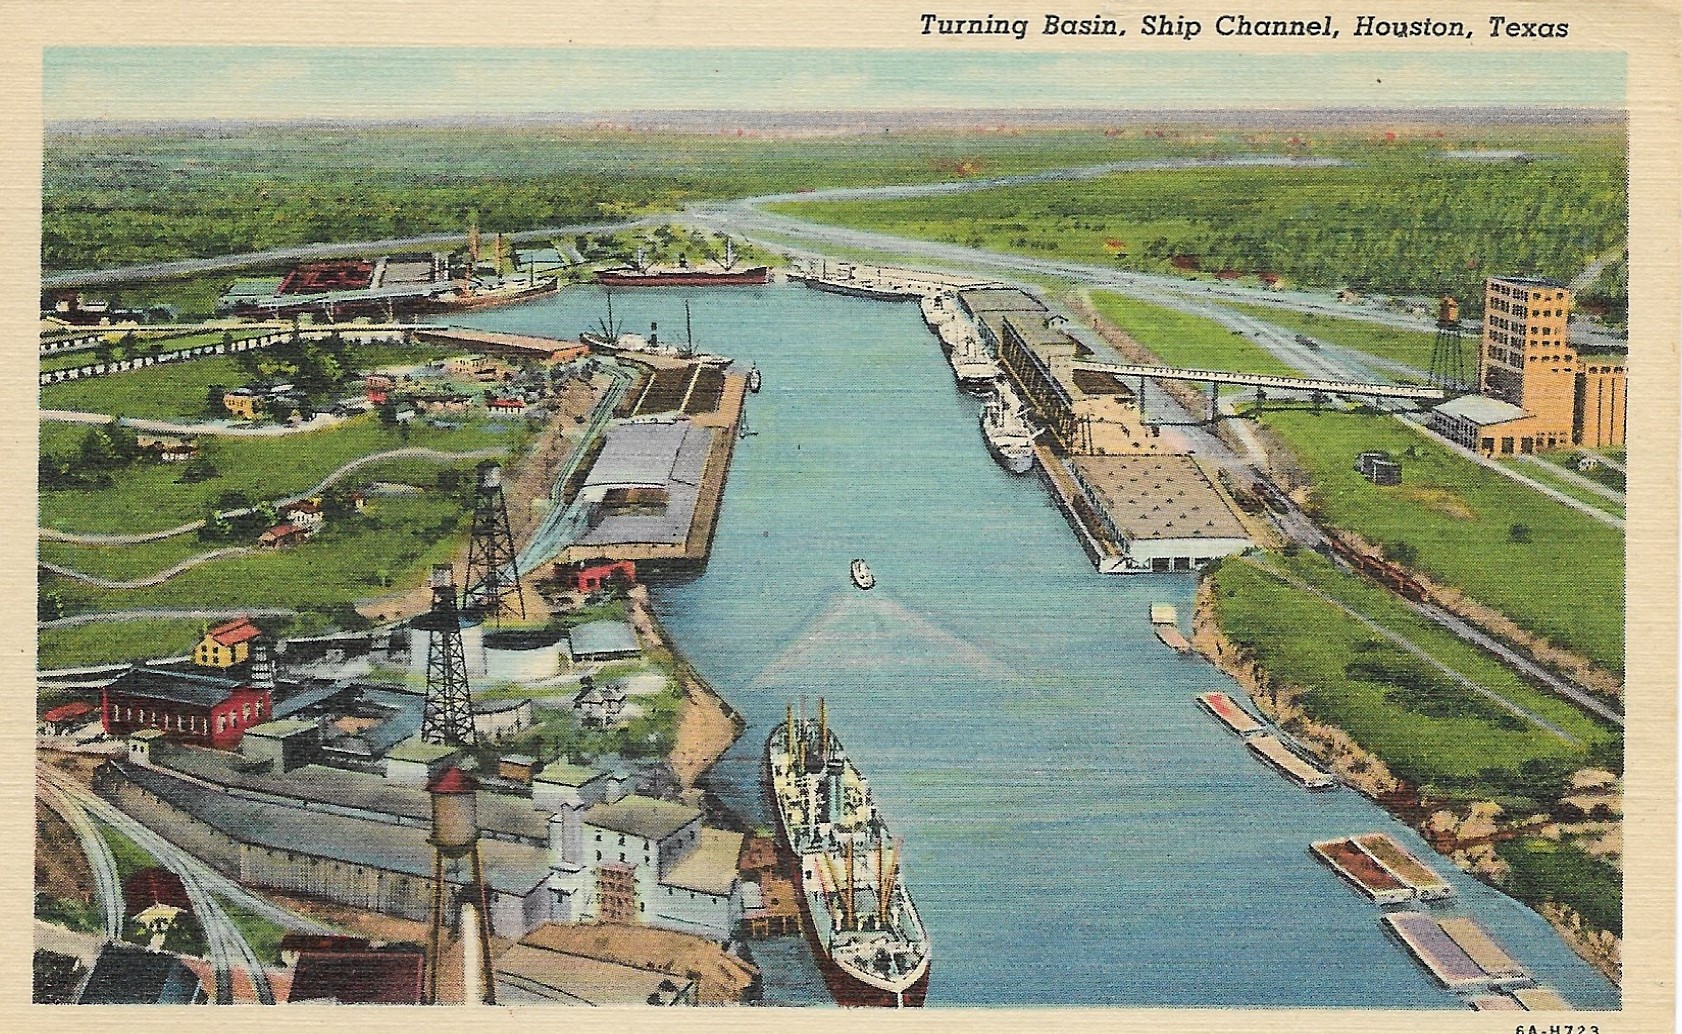 The Houston Ship Channel, 1930s